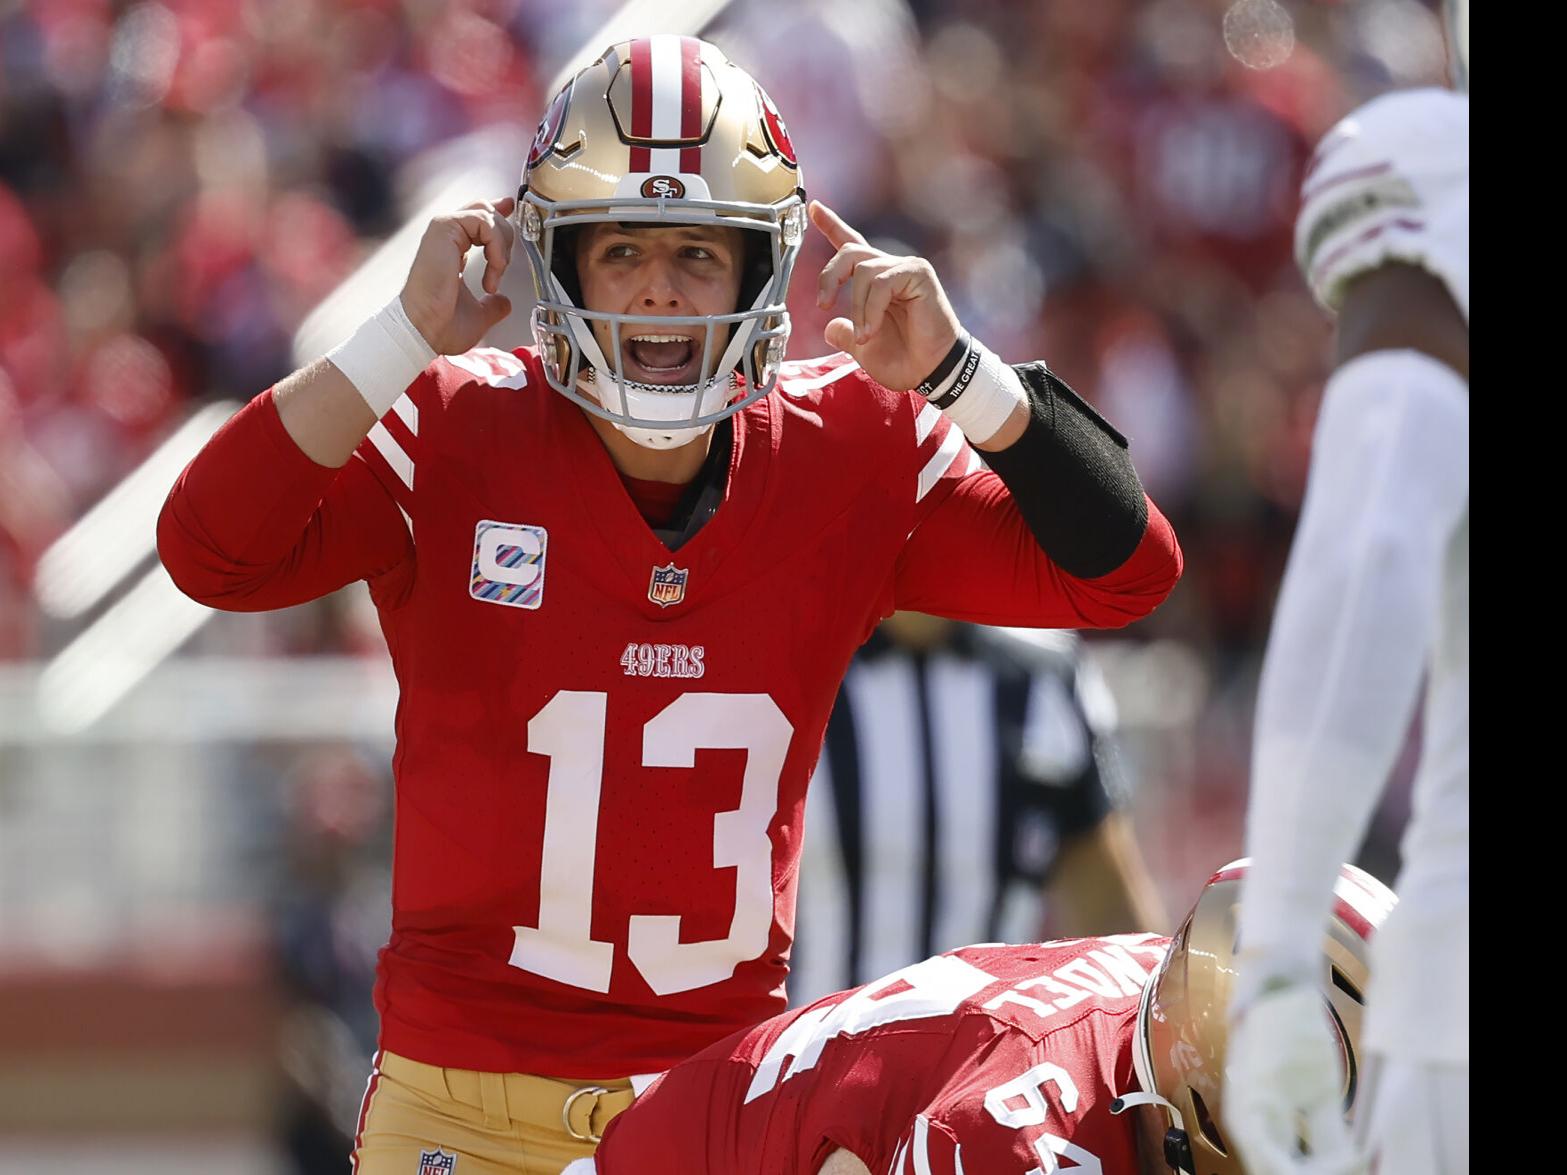 NFL Playoff Predictions: The 49ers have a significant home-field